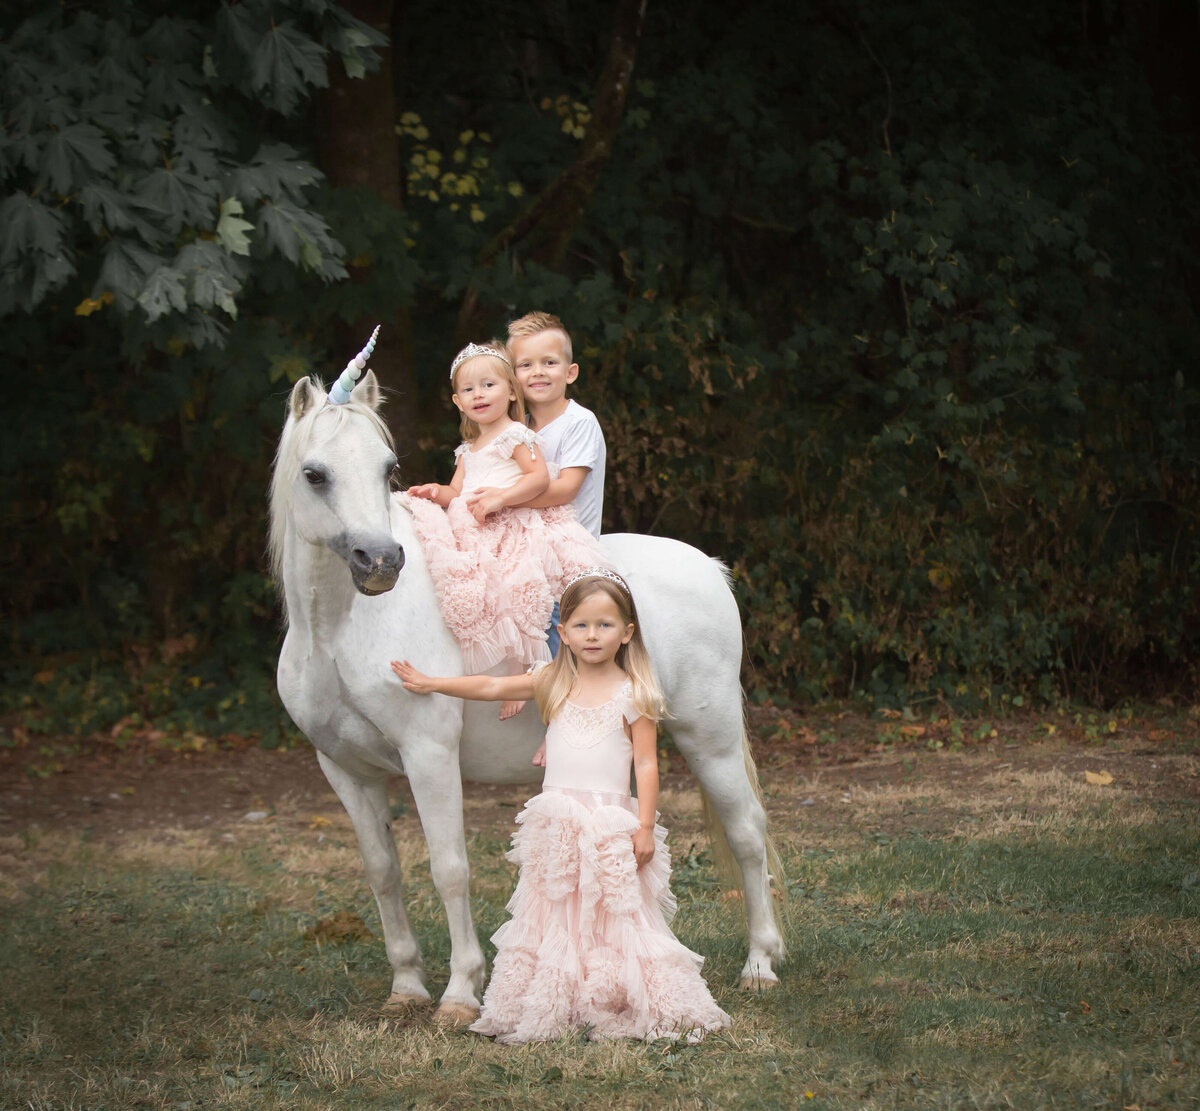 Gorgeous horse unicorn with siblings in Dollcake dresses